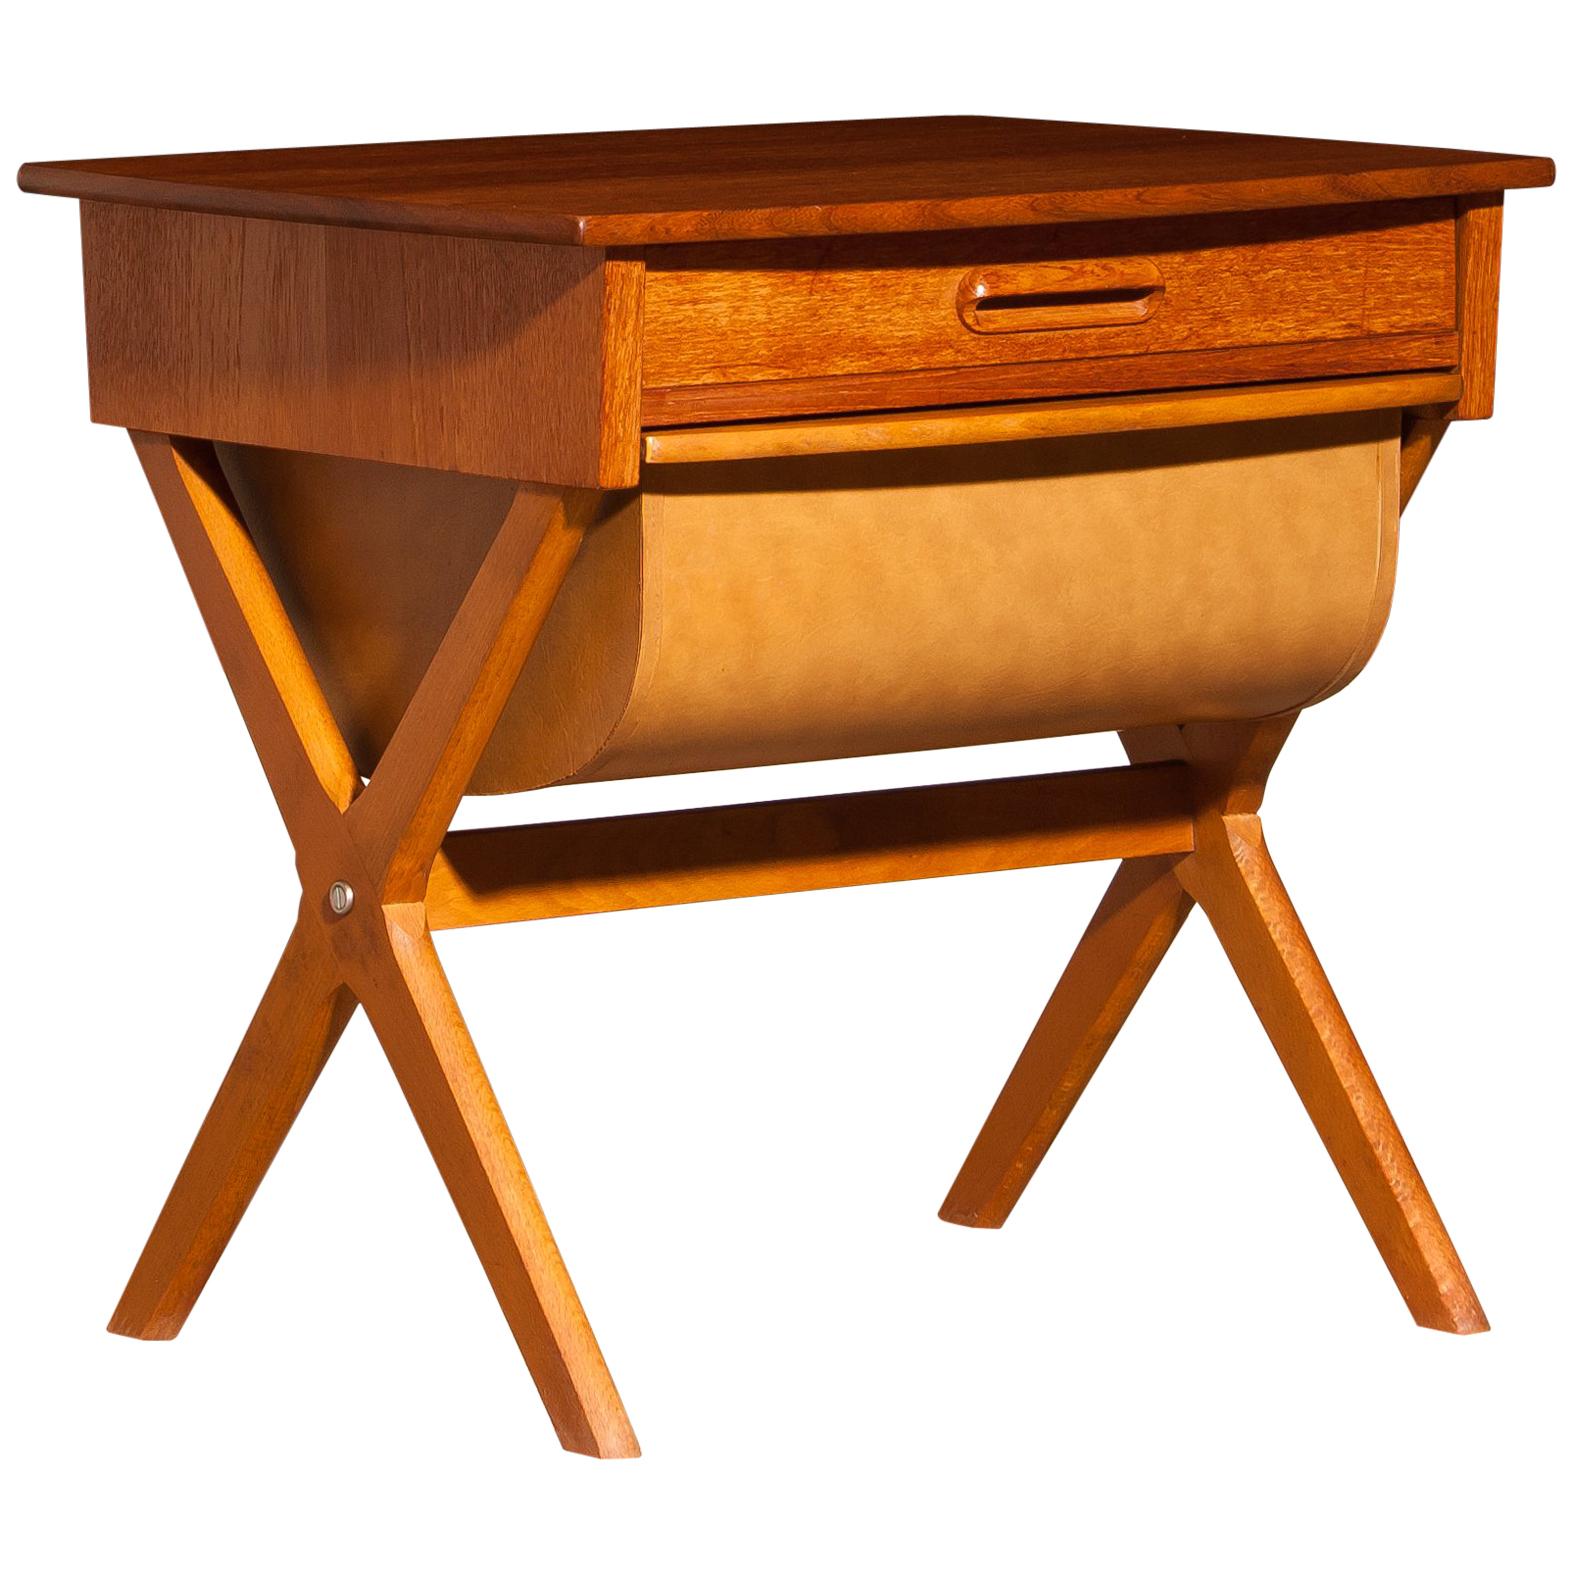 Swedish 1960s, Teak Sewing, Side Table from Sweden